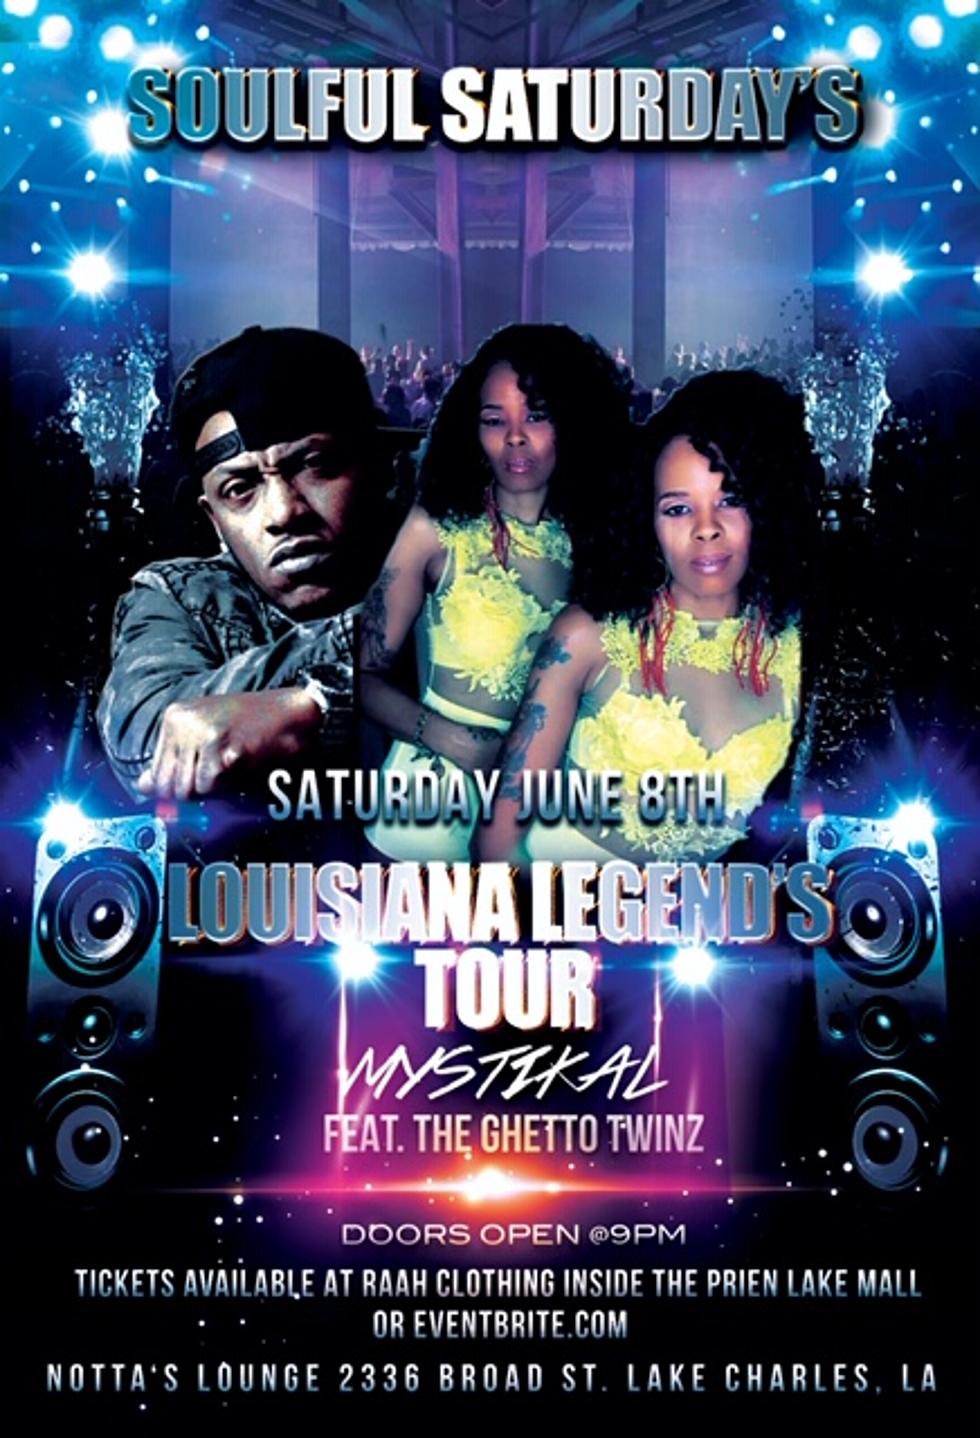 Don’t Miss The Legends Of Louisiana Tour Featuring Mystikal And Ghetto Twins